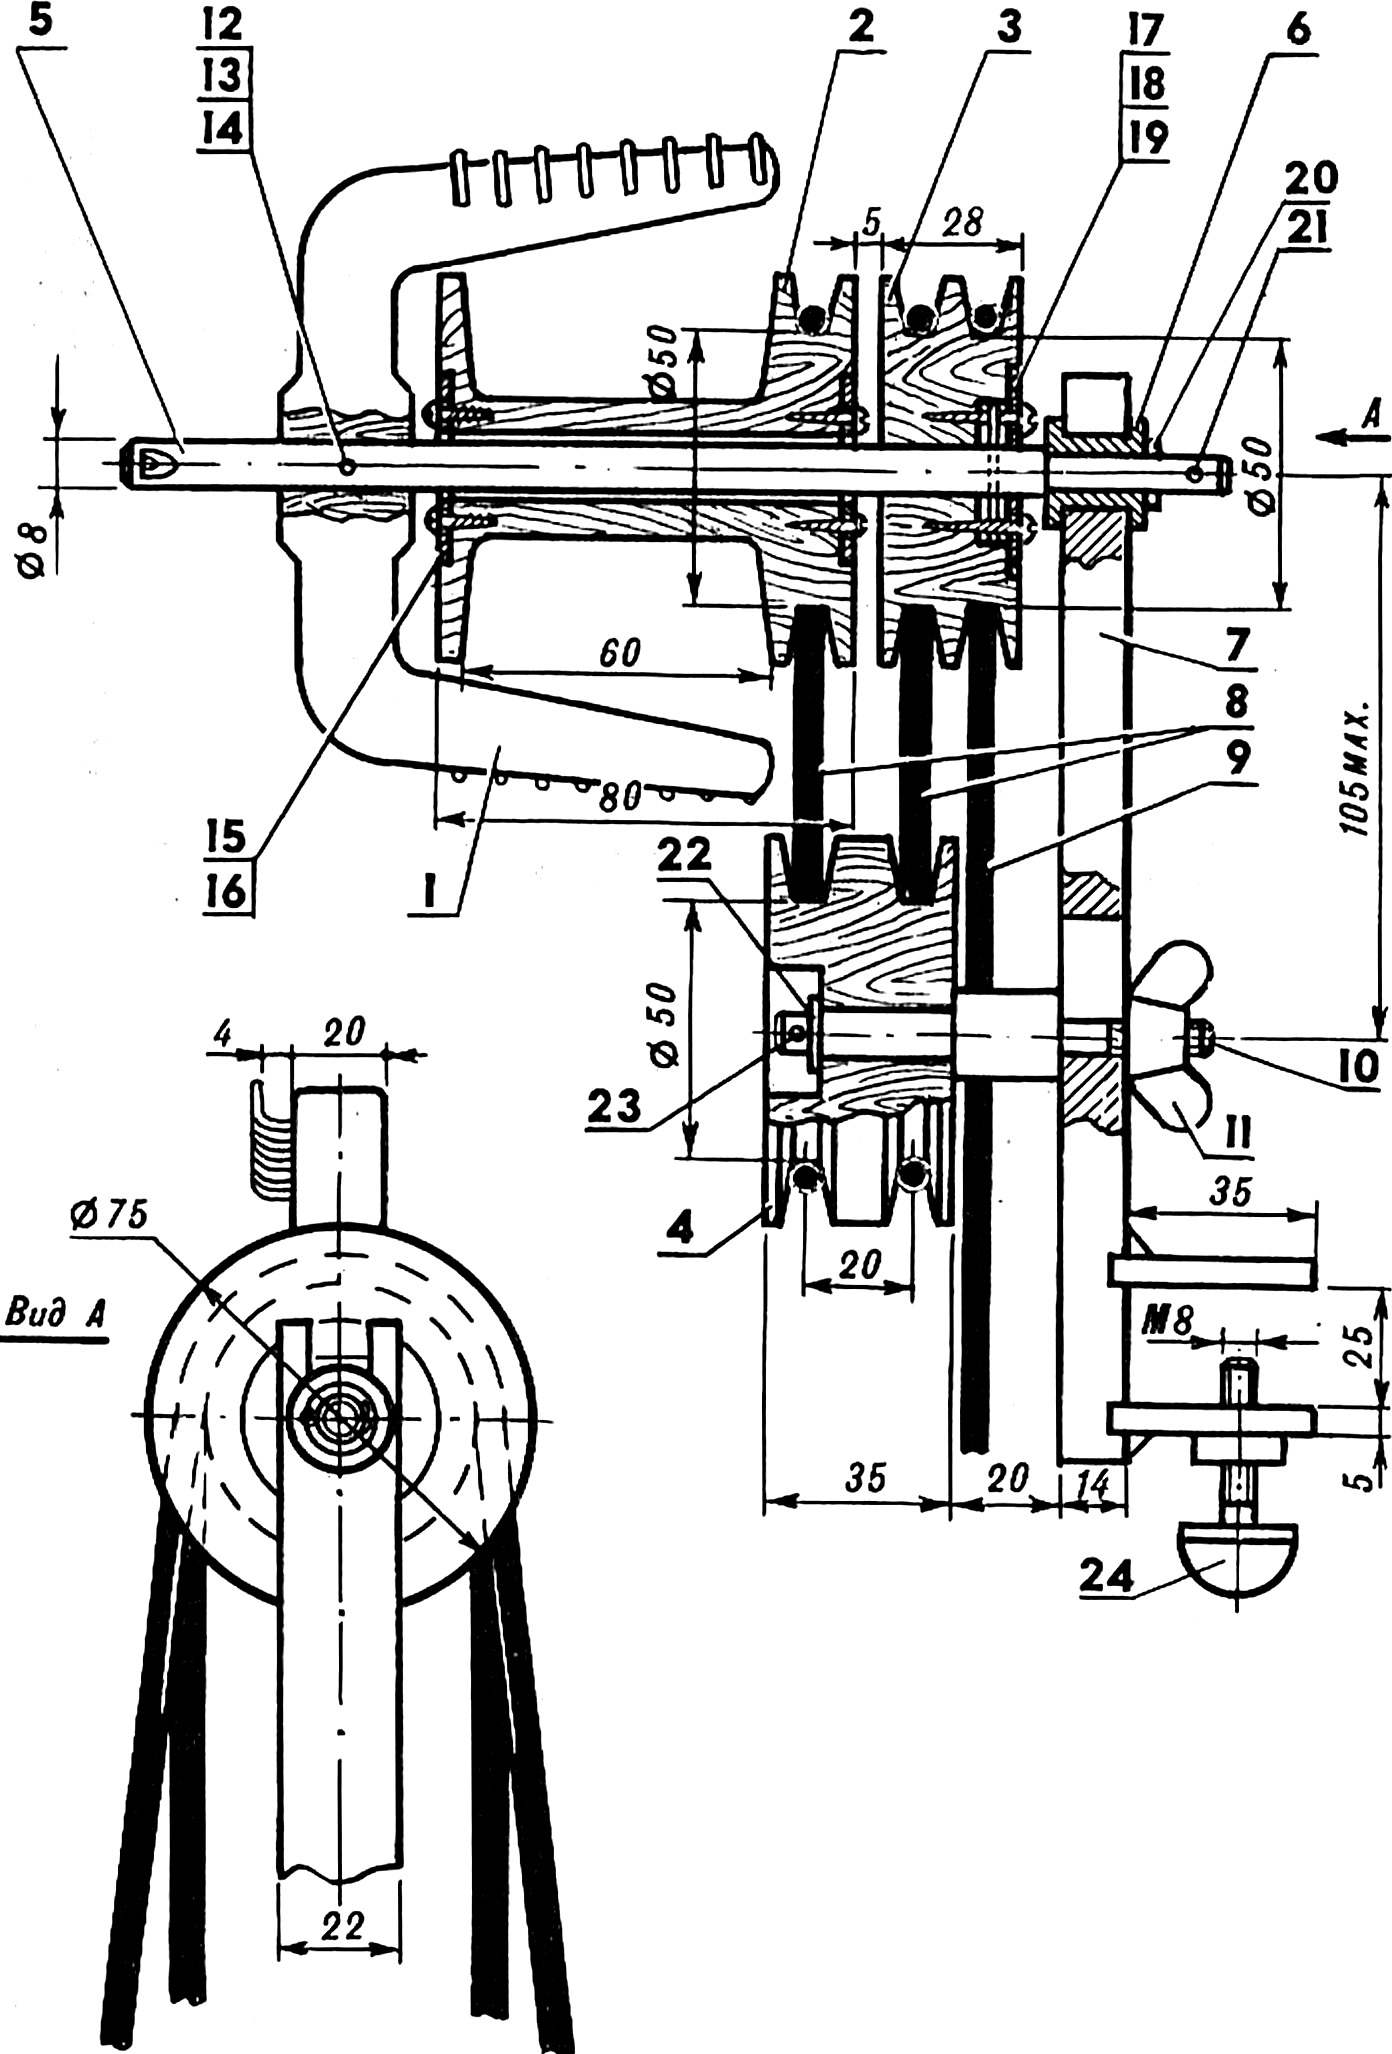 Device attachments for hand-spinning.